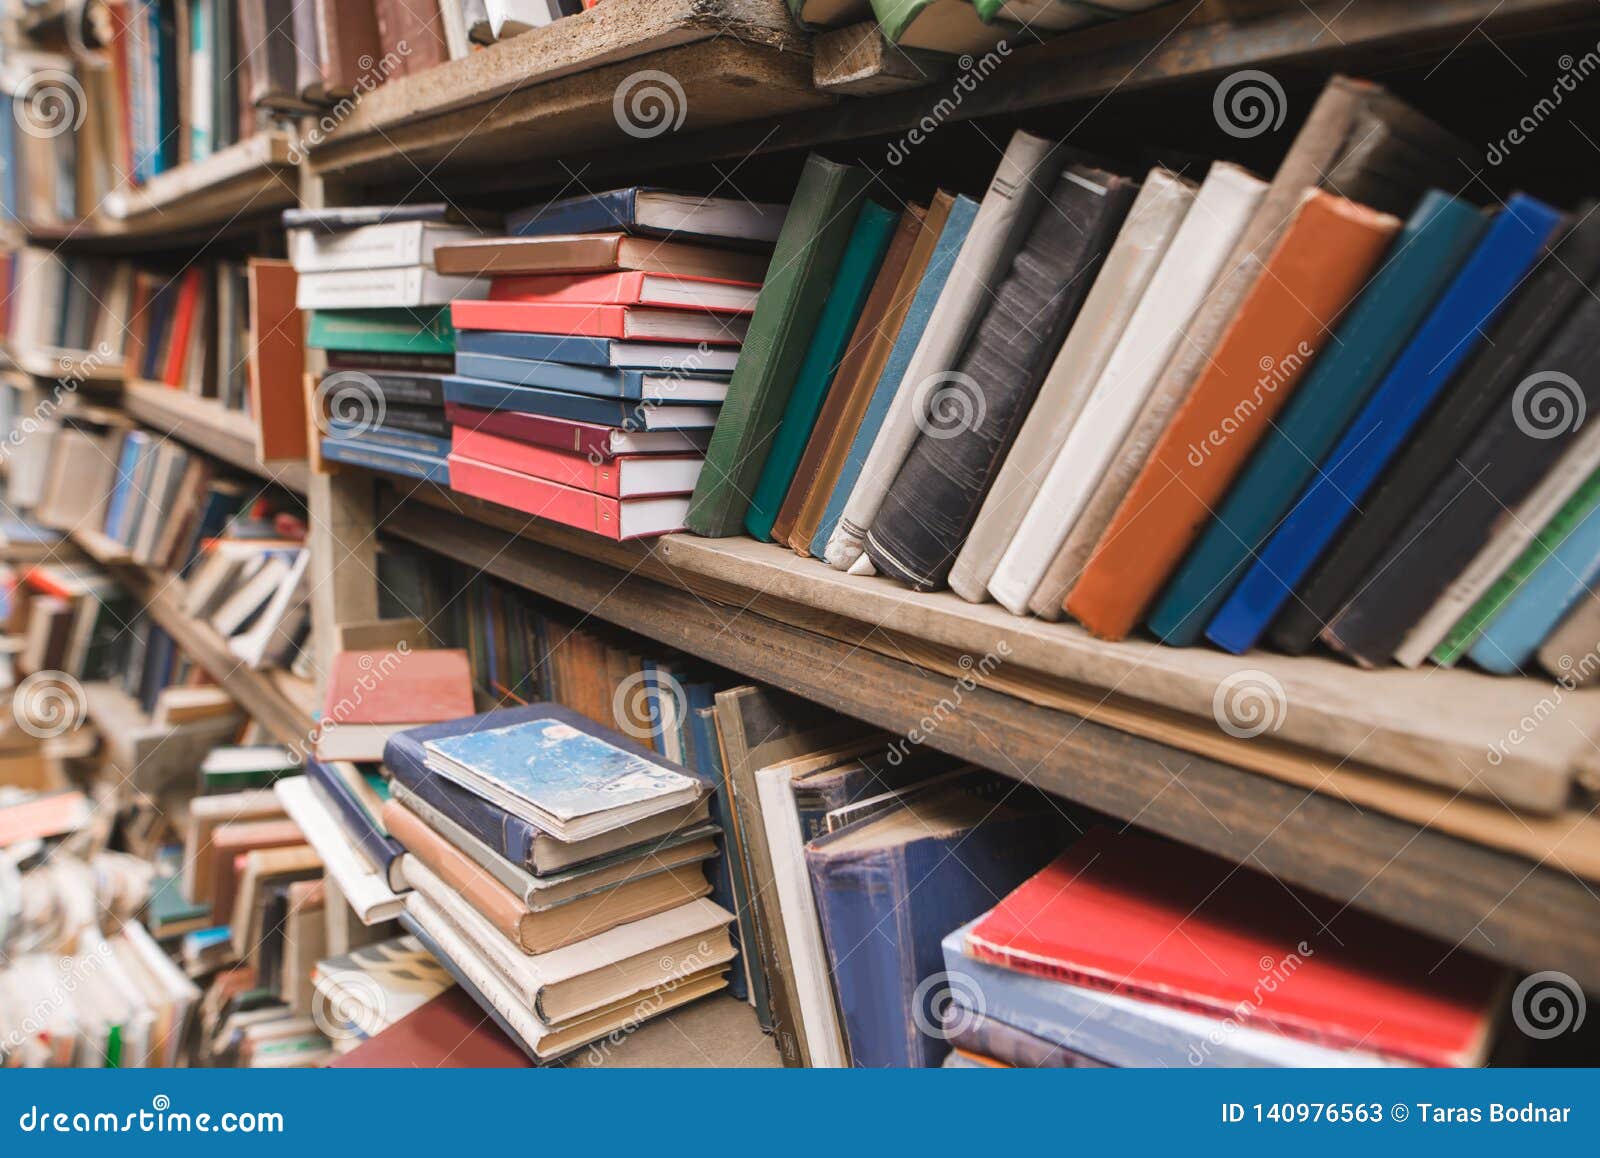 Shelves With Books In The Old Library Book Shelves Background Old Books On Library Shelves Stock Image Image Of Hardcover Leisure